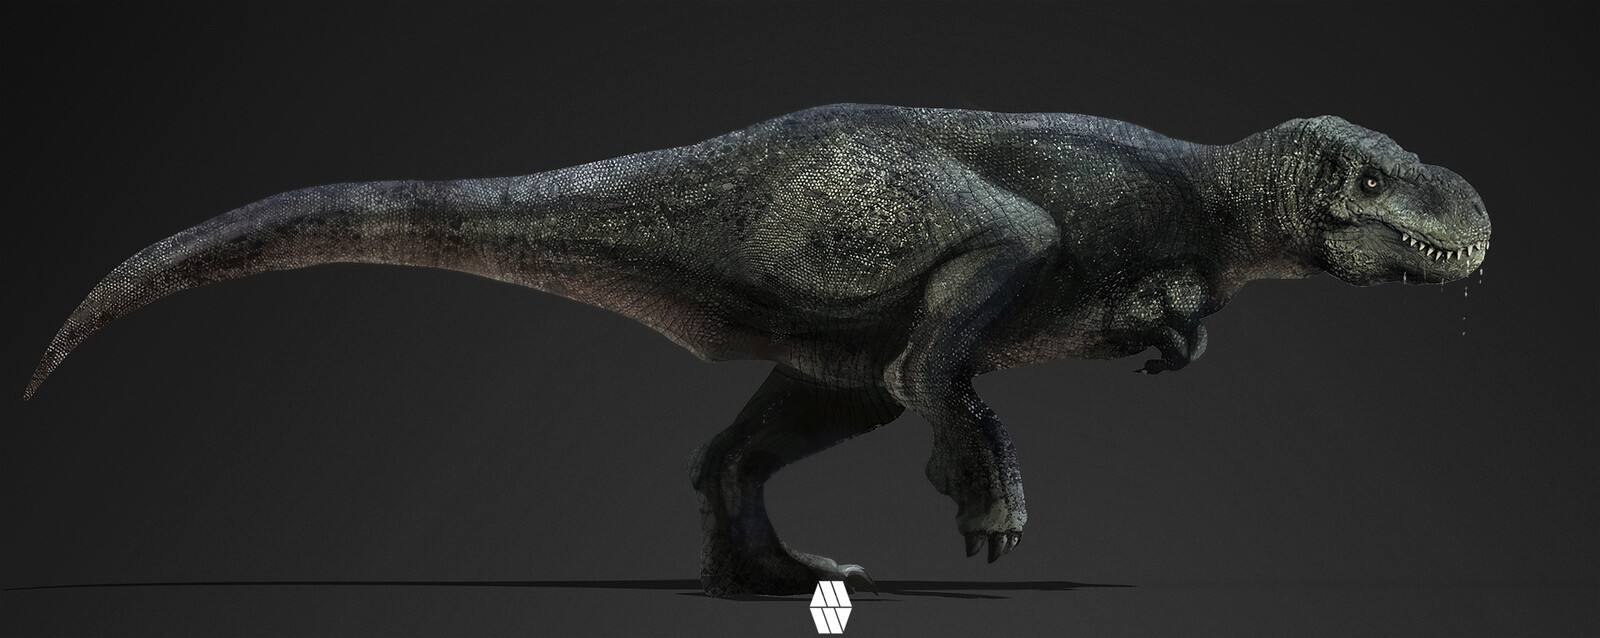 Trex Concept - Personal Project 